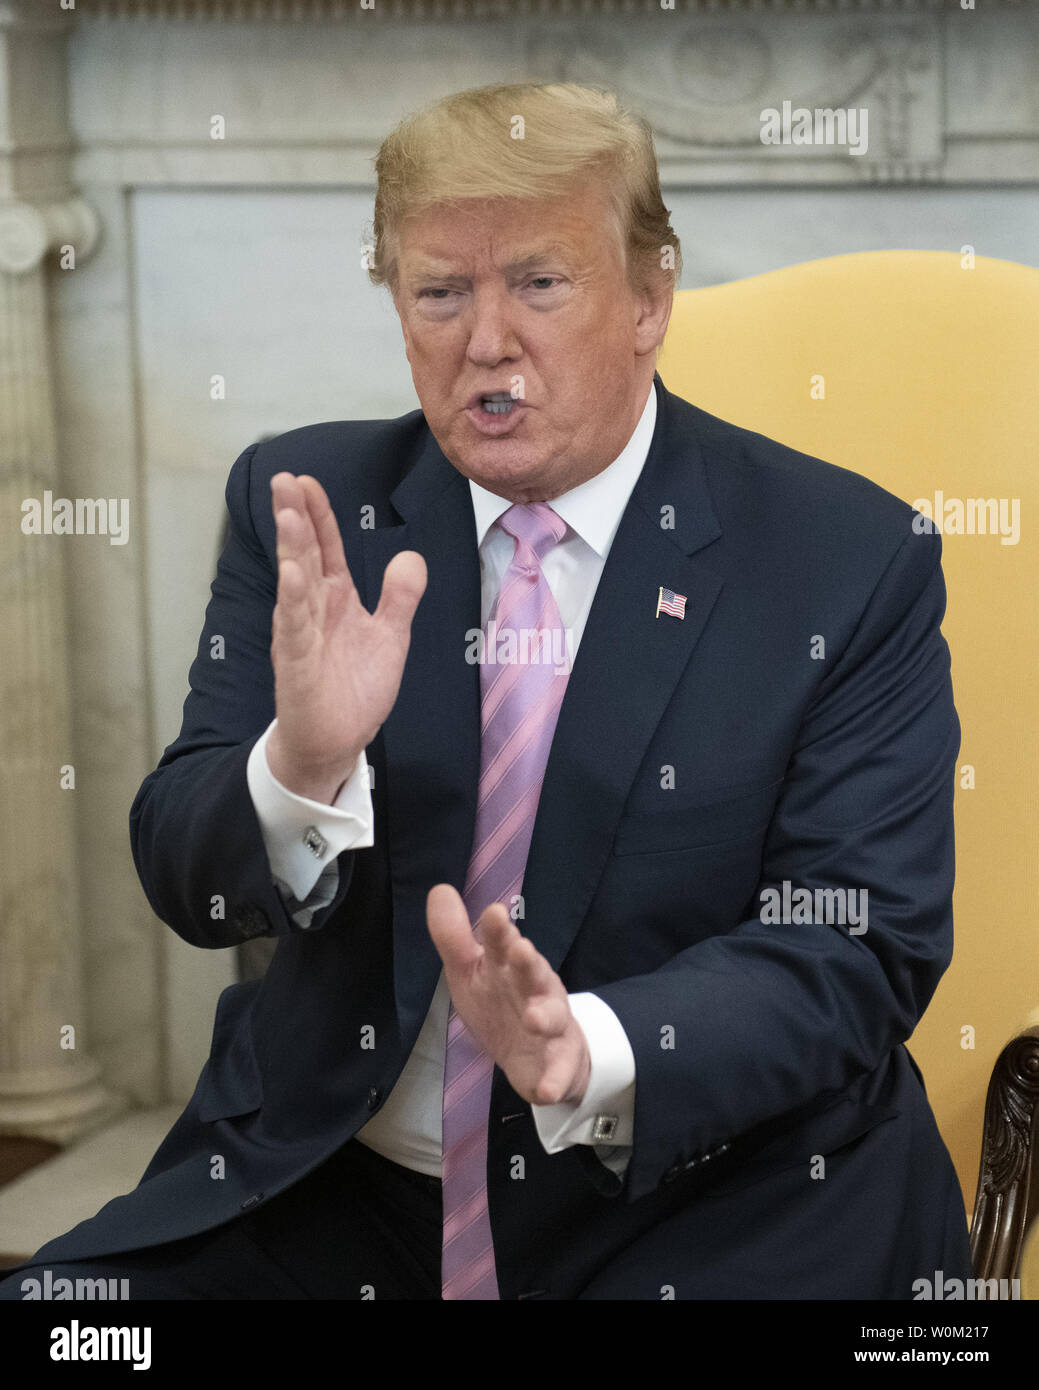 President Donald Trump meets with Egyptian President Abdel Fattah el-Sisi (not shown) in the Oval Office of the White House in Washington, DC on April 9, 2019.  El-Sisi is visiting the White House for talks.     Photo by Ron Sachs/UPI Stock Photo